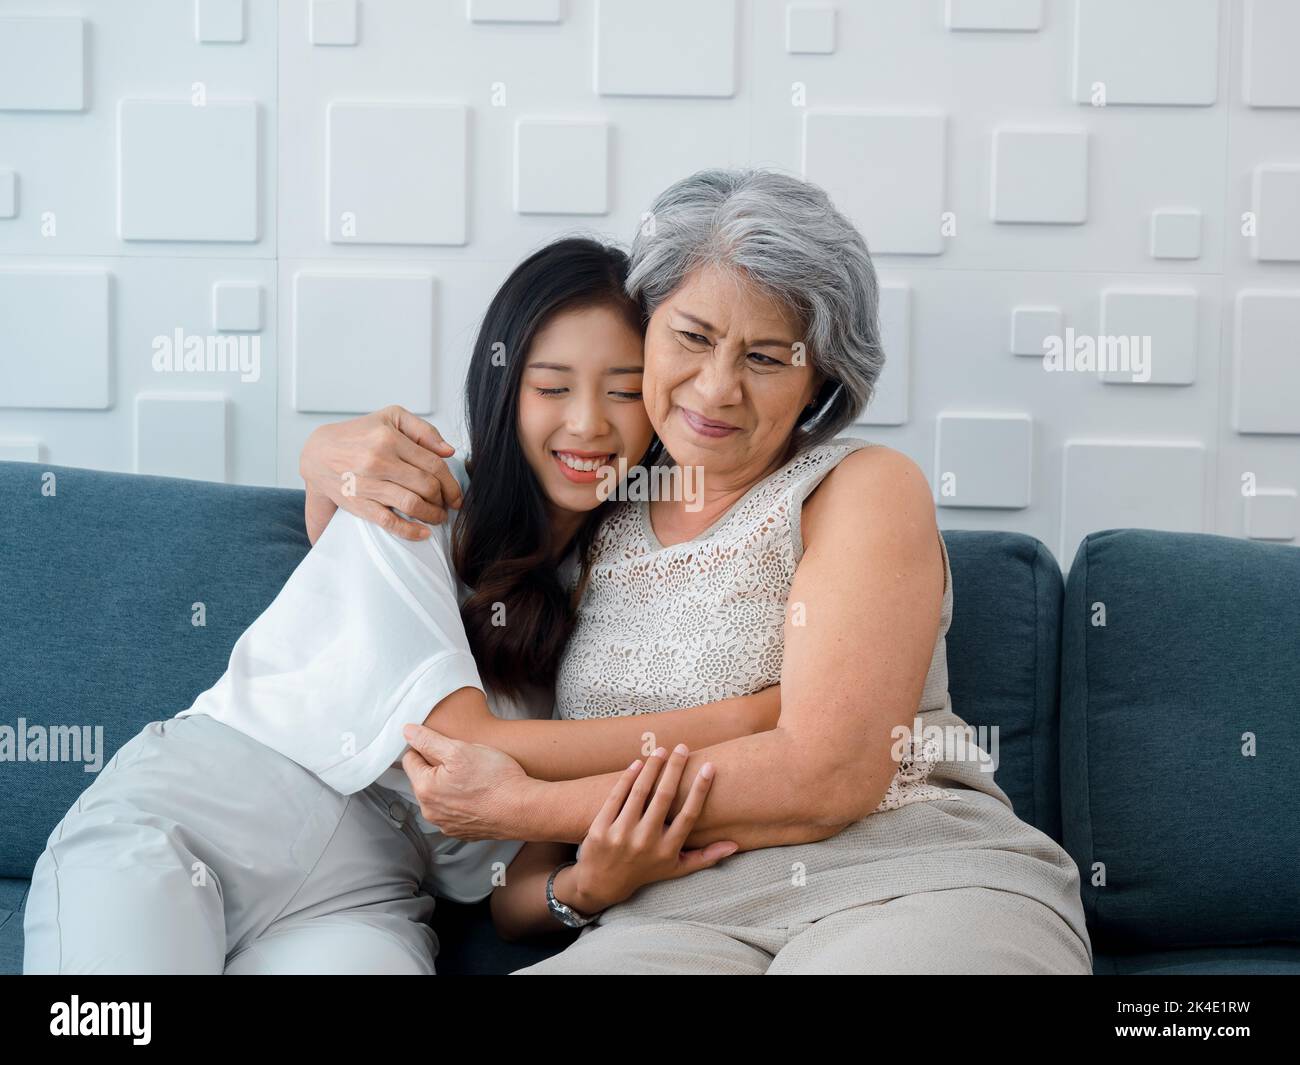 Portrait of happy Asian senior, mother or grandparent white hair embracing her beautiful daughter or grandchild smiling and closing eyes with feel lov Stock Photo